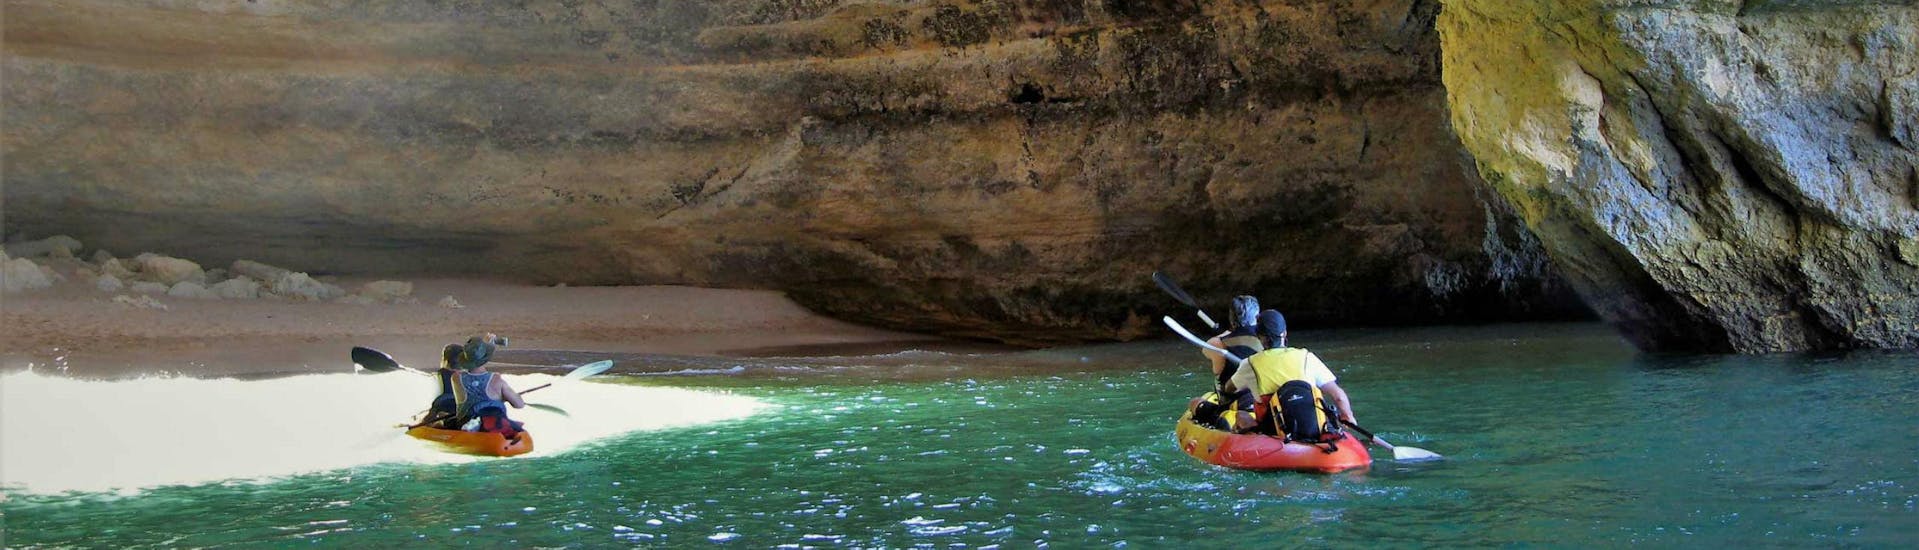 A group of kayakers is paddling into the Benagil Cave during their Boat and Kayak Tour - Benagil Cave with Seasiren Tours.